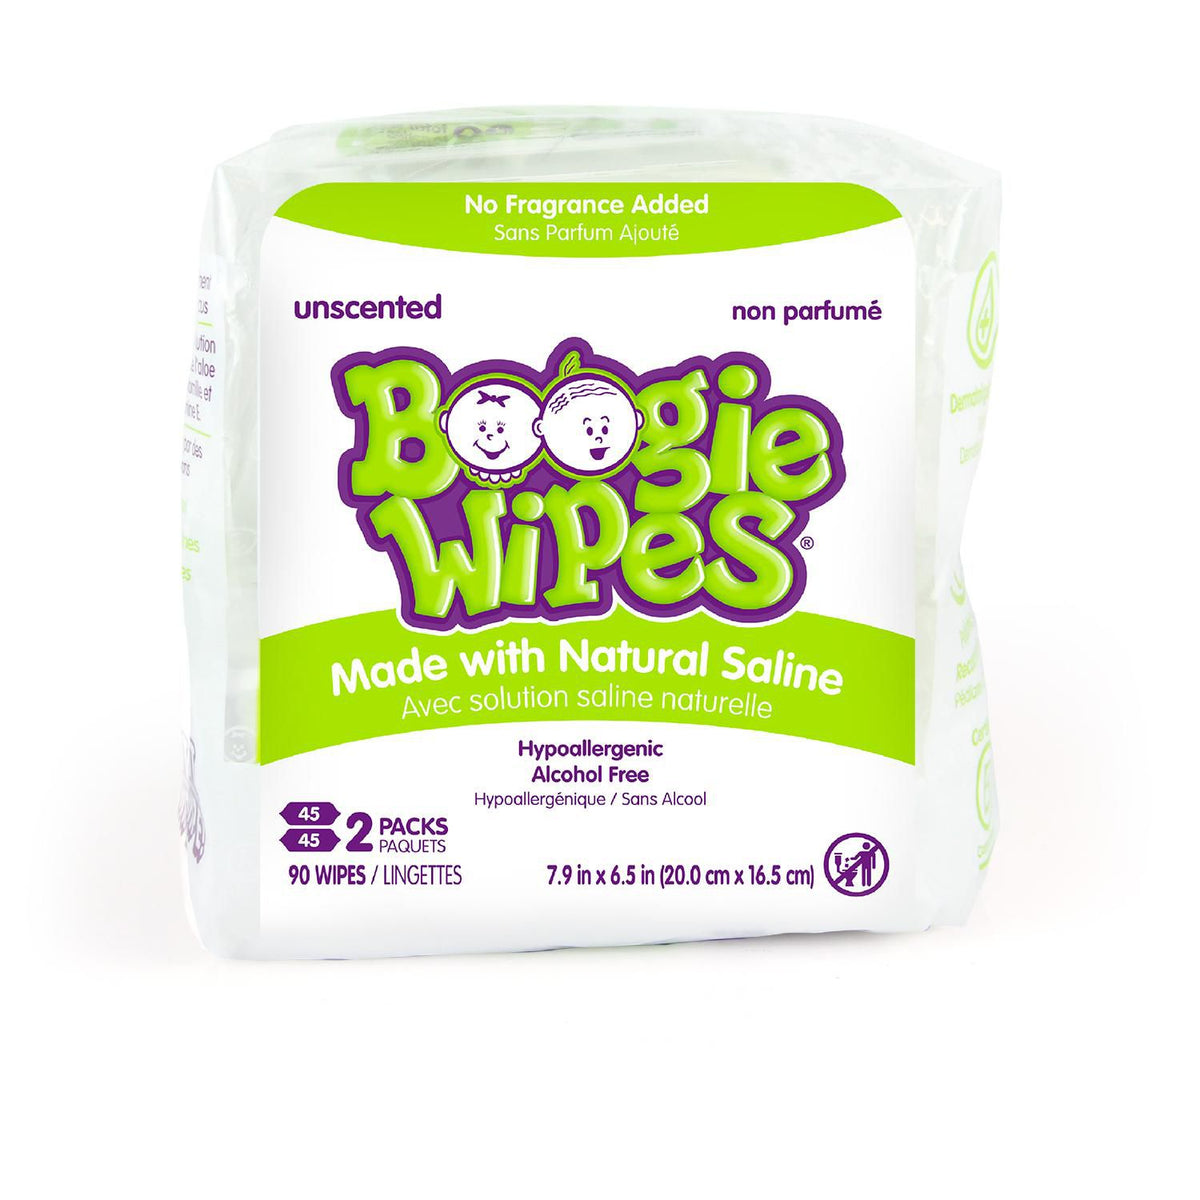 Boogie Wipes Gentle Saline Nose Wipes for stuffy noses - Unscented, 90 Count